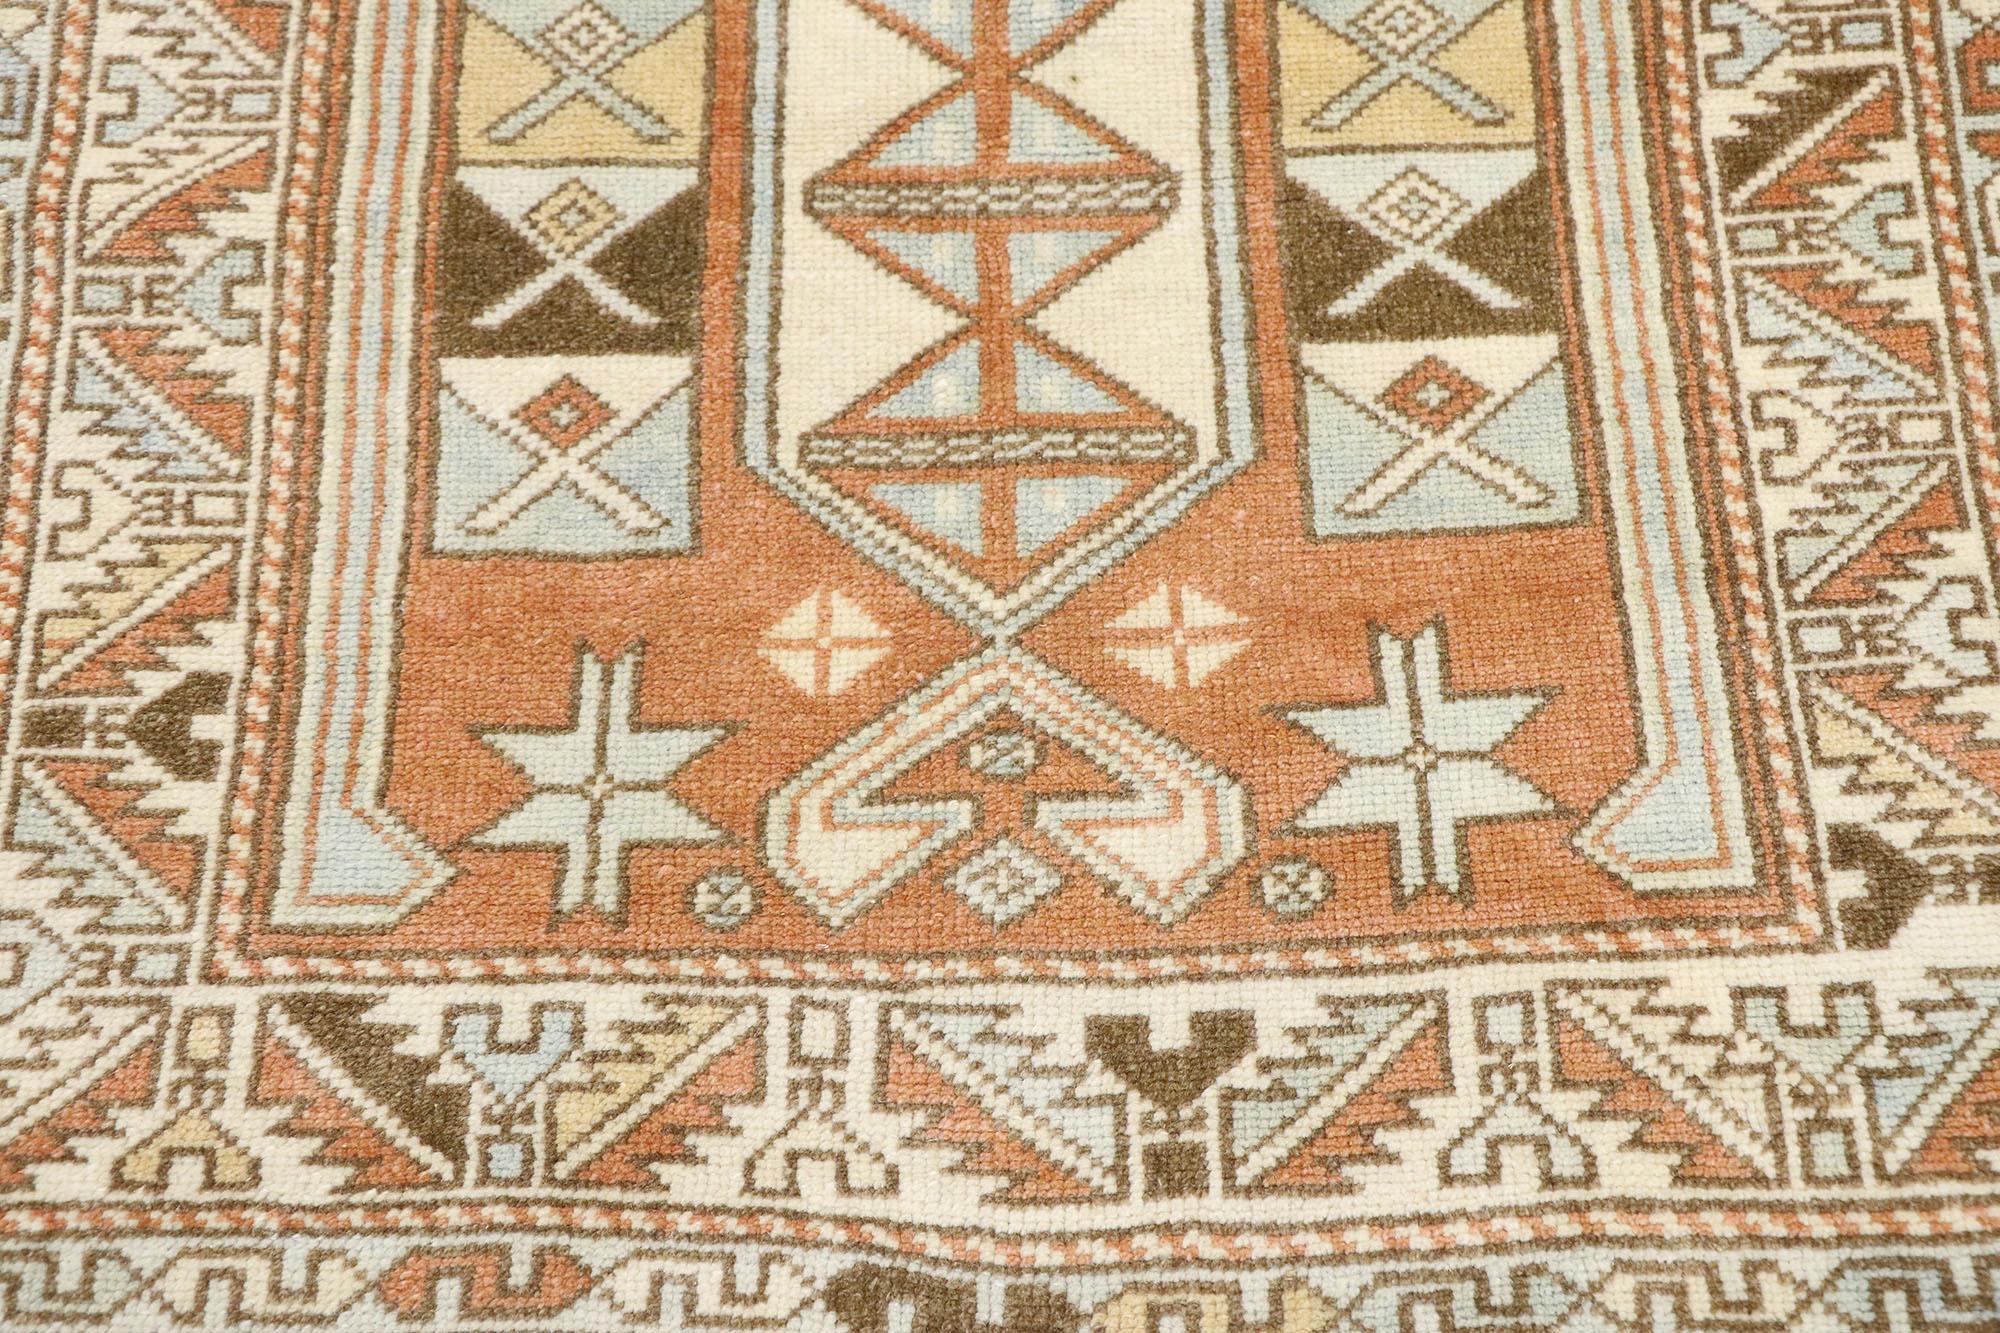 Vintage Turkish Oushak Rug with Southwestern Tribal Style In Good Condition For Sale In Dallas, TX